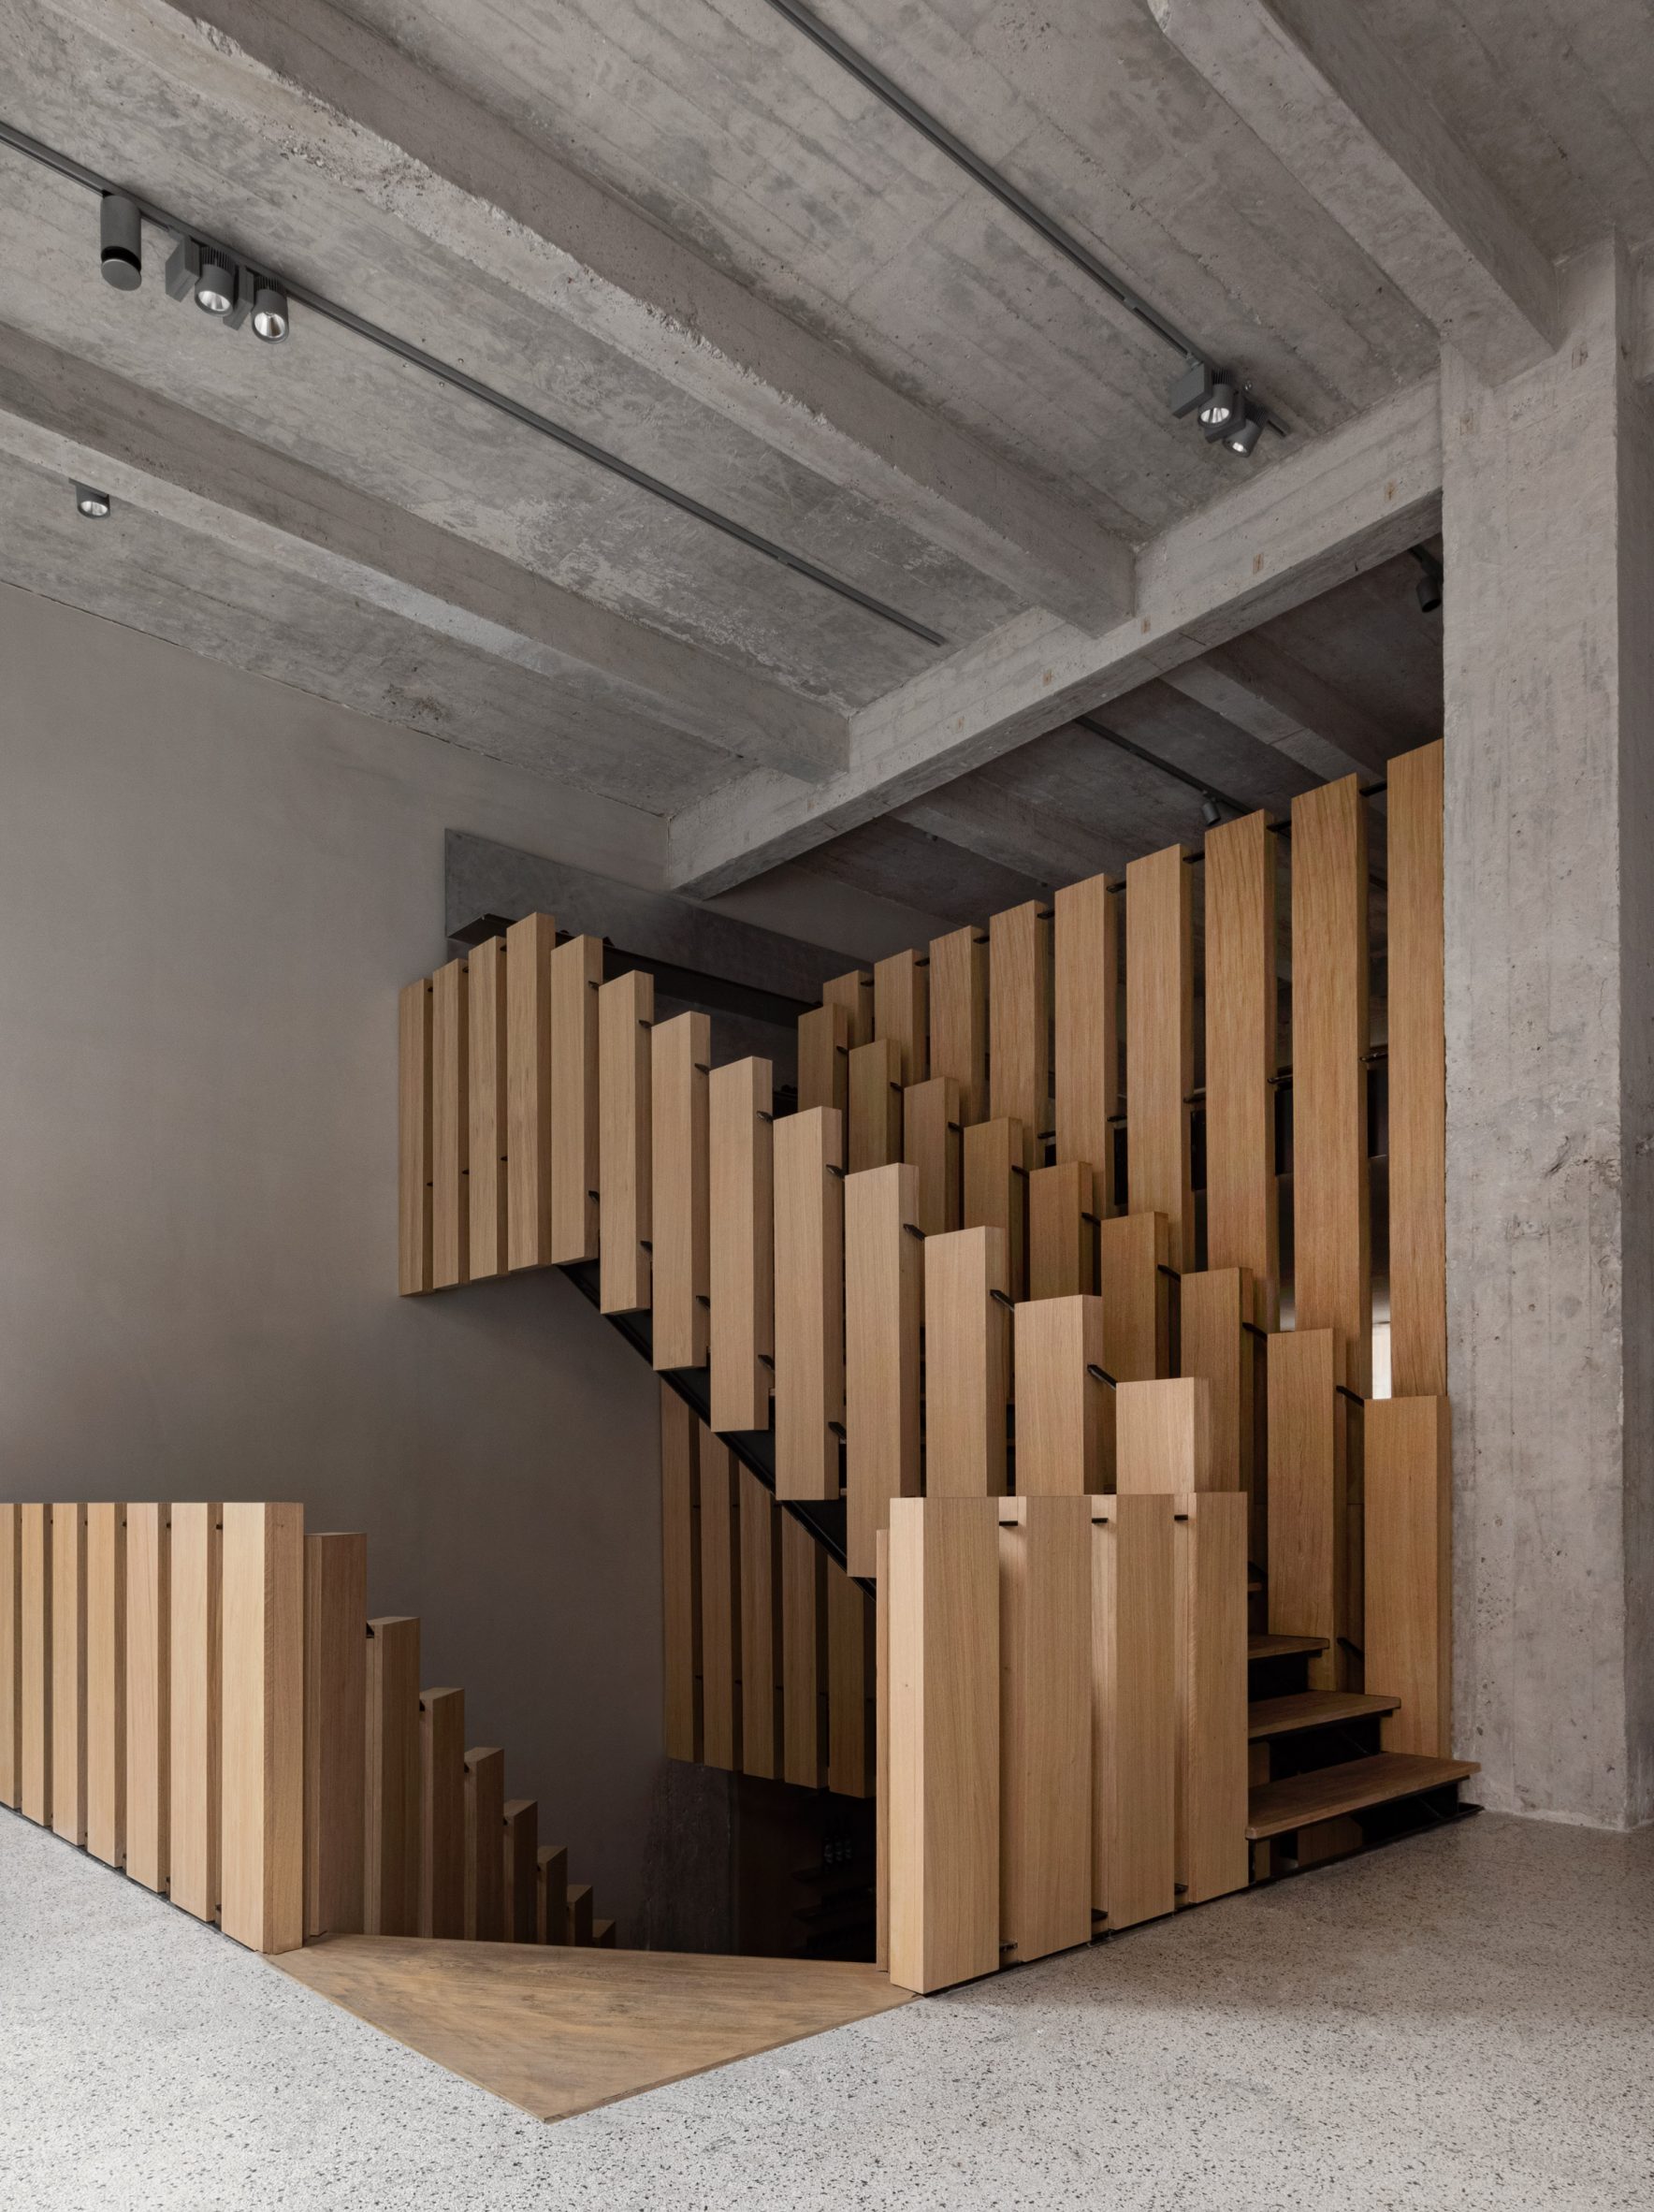 Oak staircase features in Notabene shoe store designed by Norm Architects